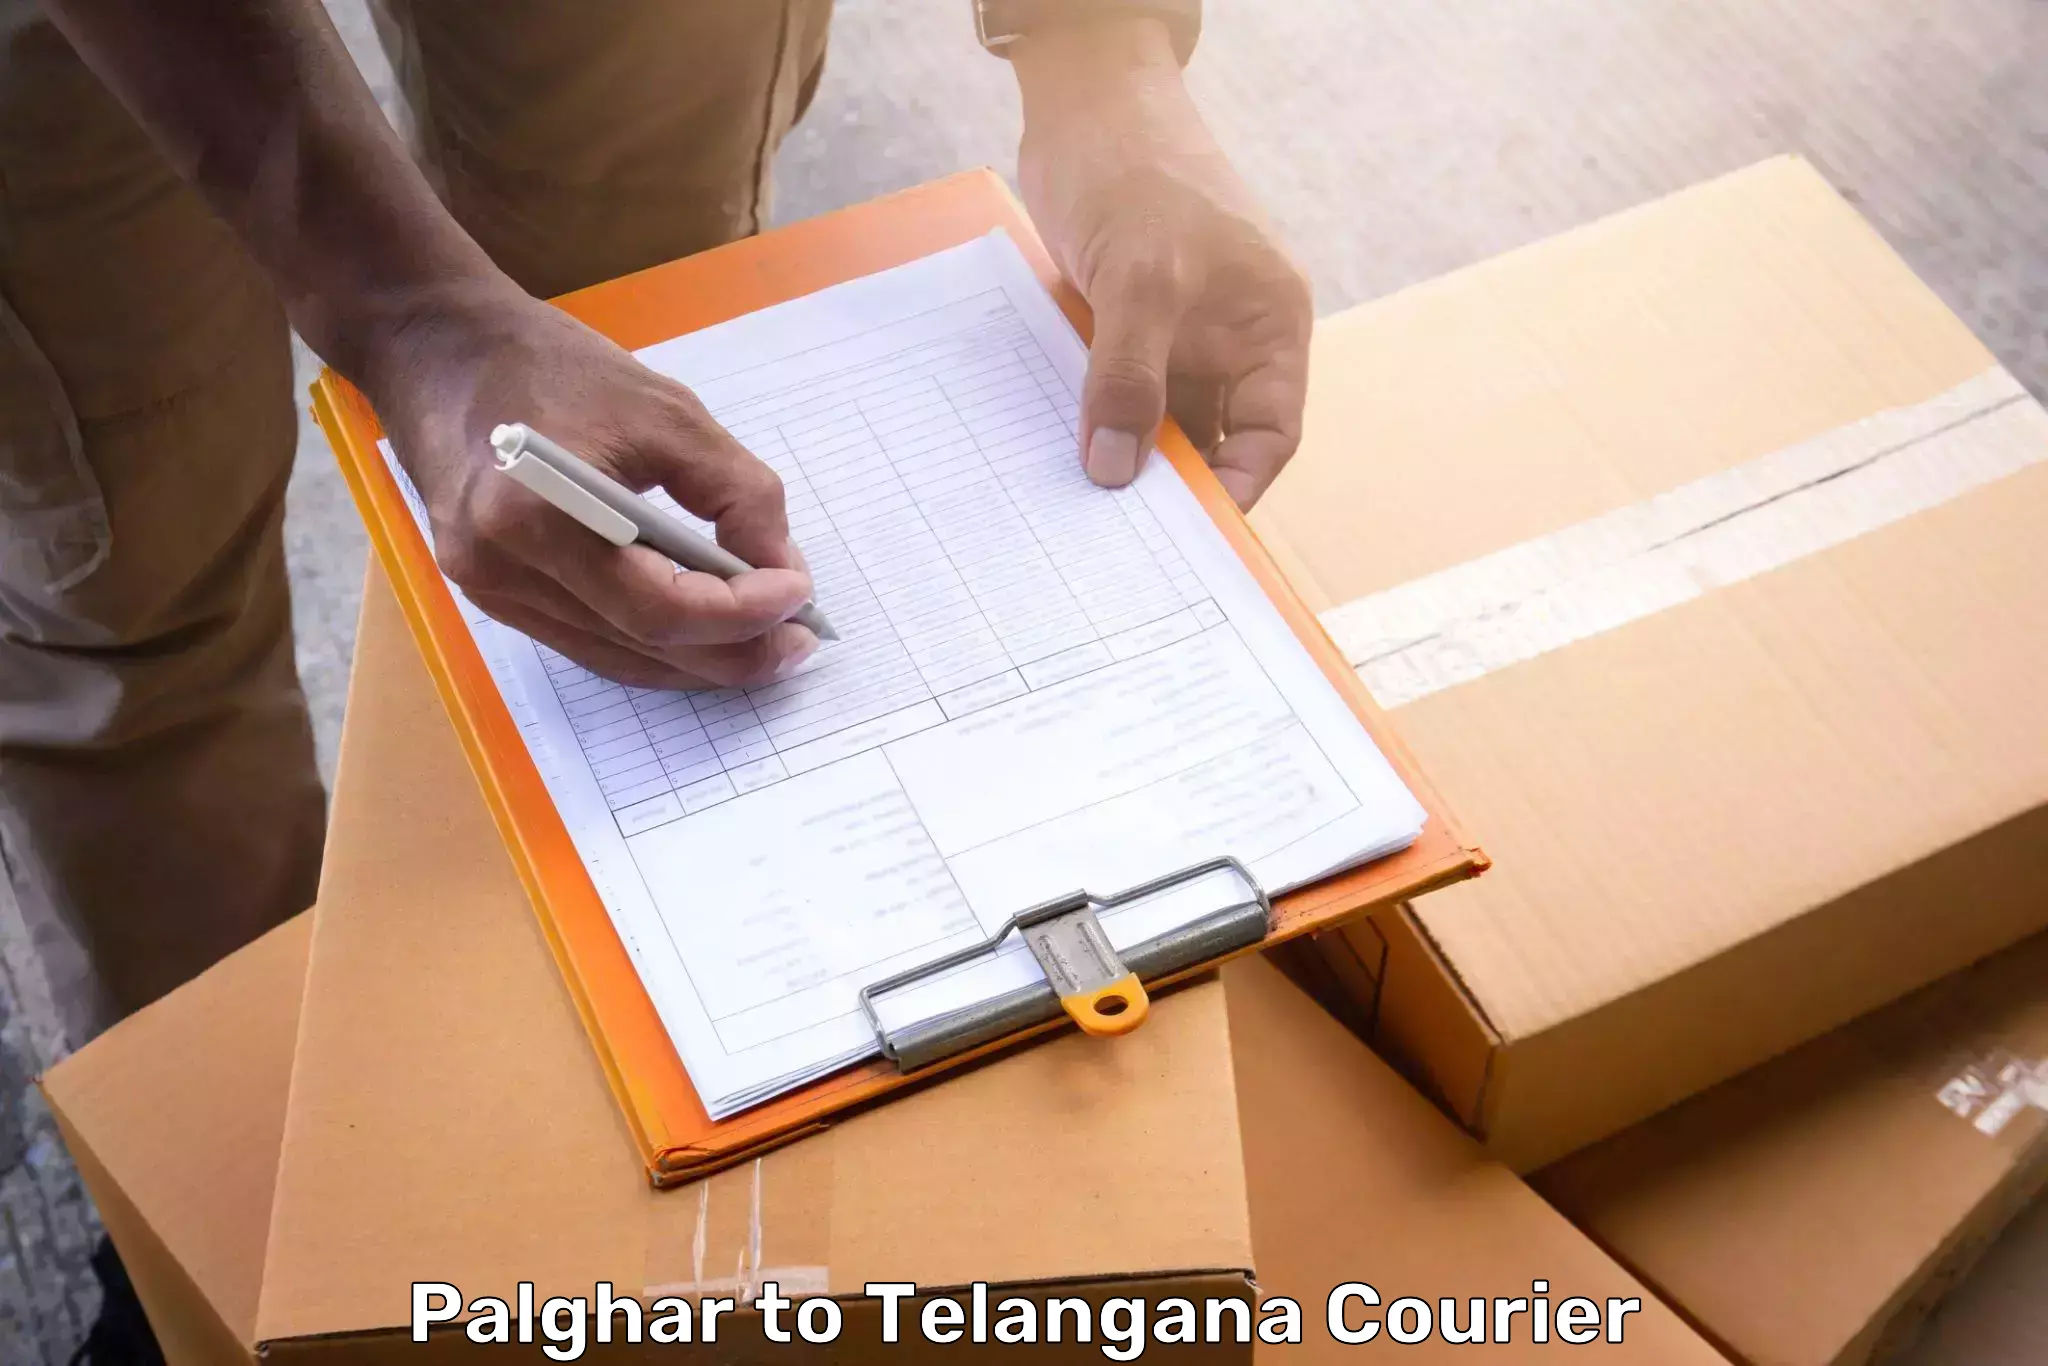 Luggage delivery network Palghar to Telangana